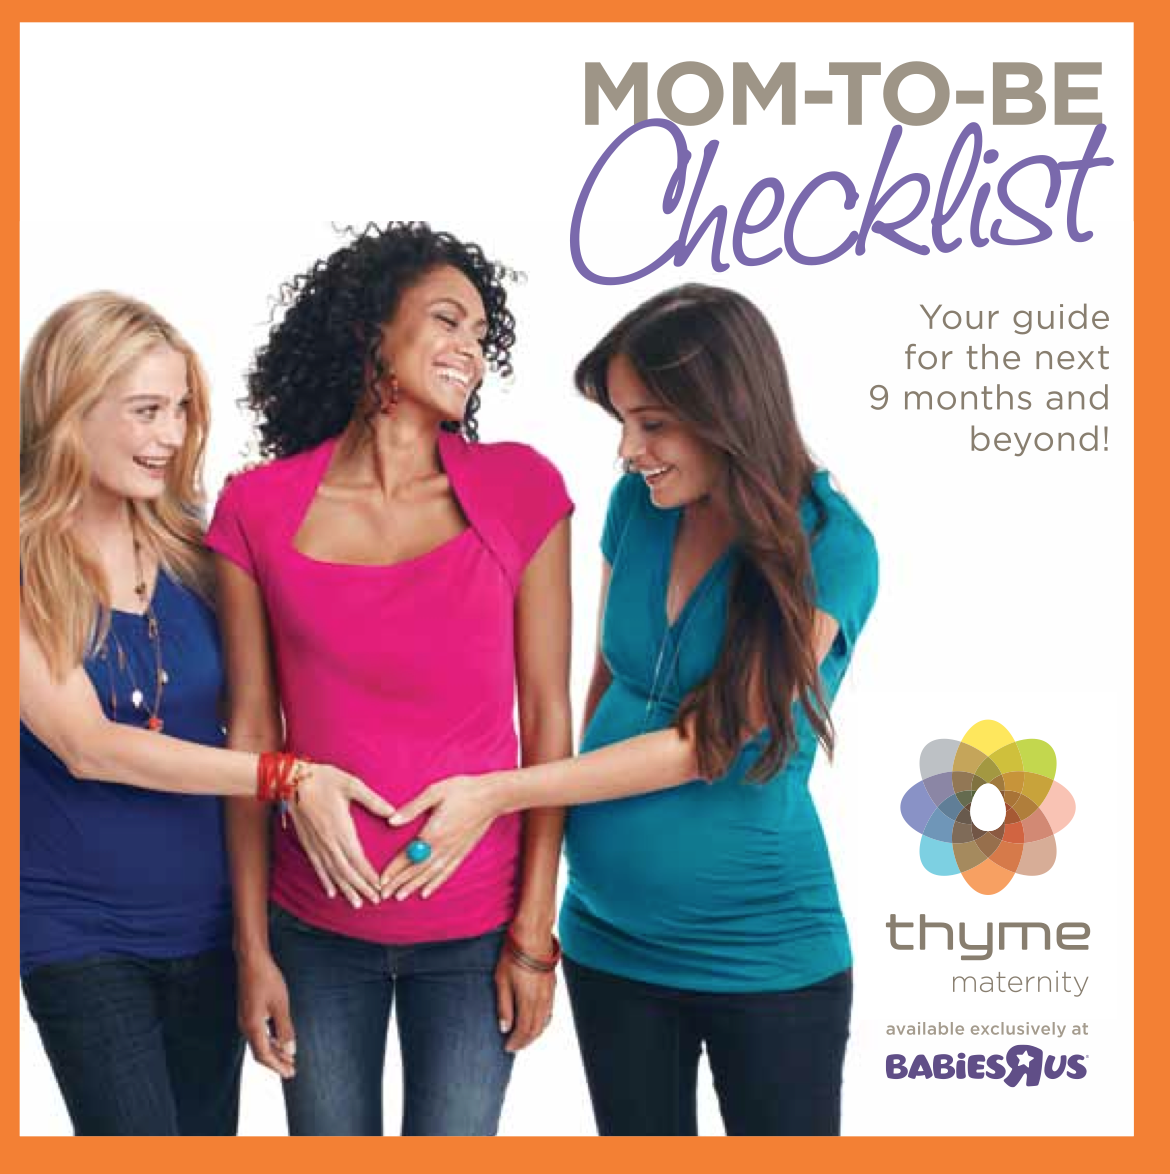 Thyme Maternity Mom-to-Be Checklist - Stylish Life for Moms